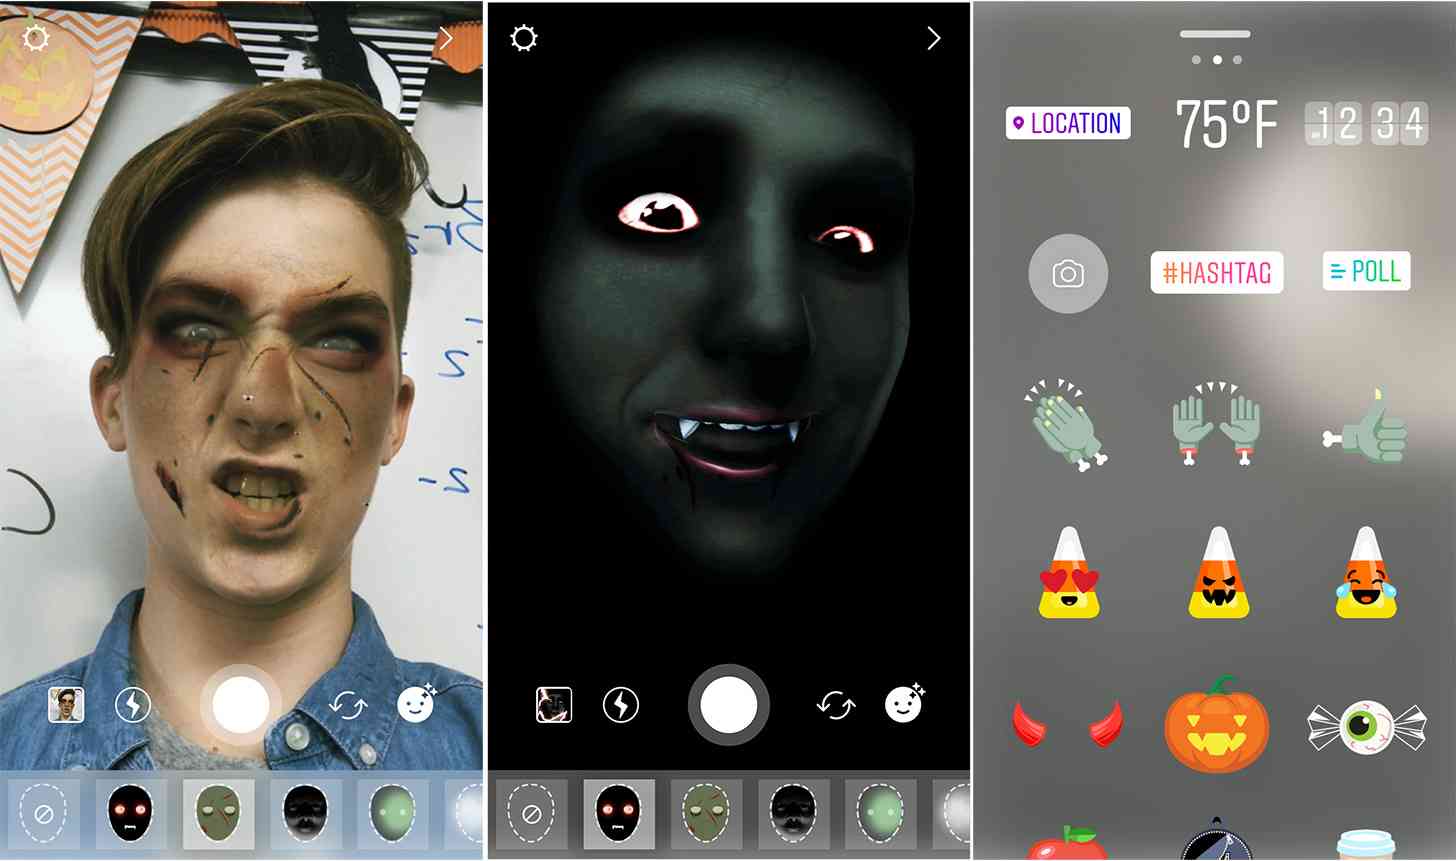 Instagram Halloween face filters and stickers